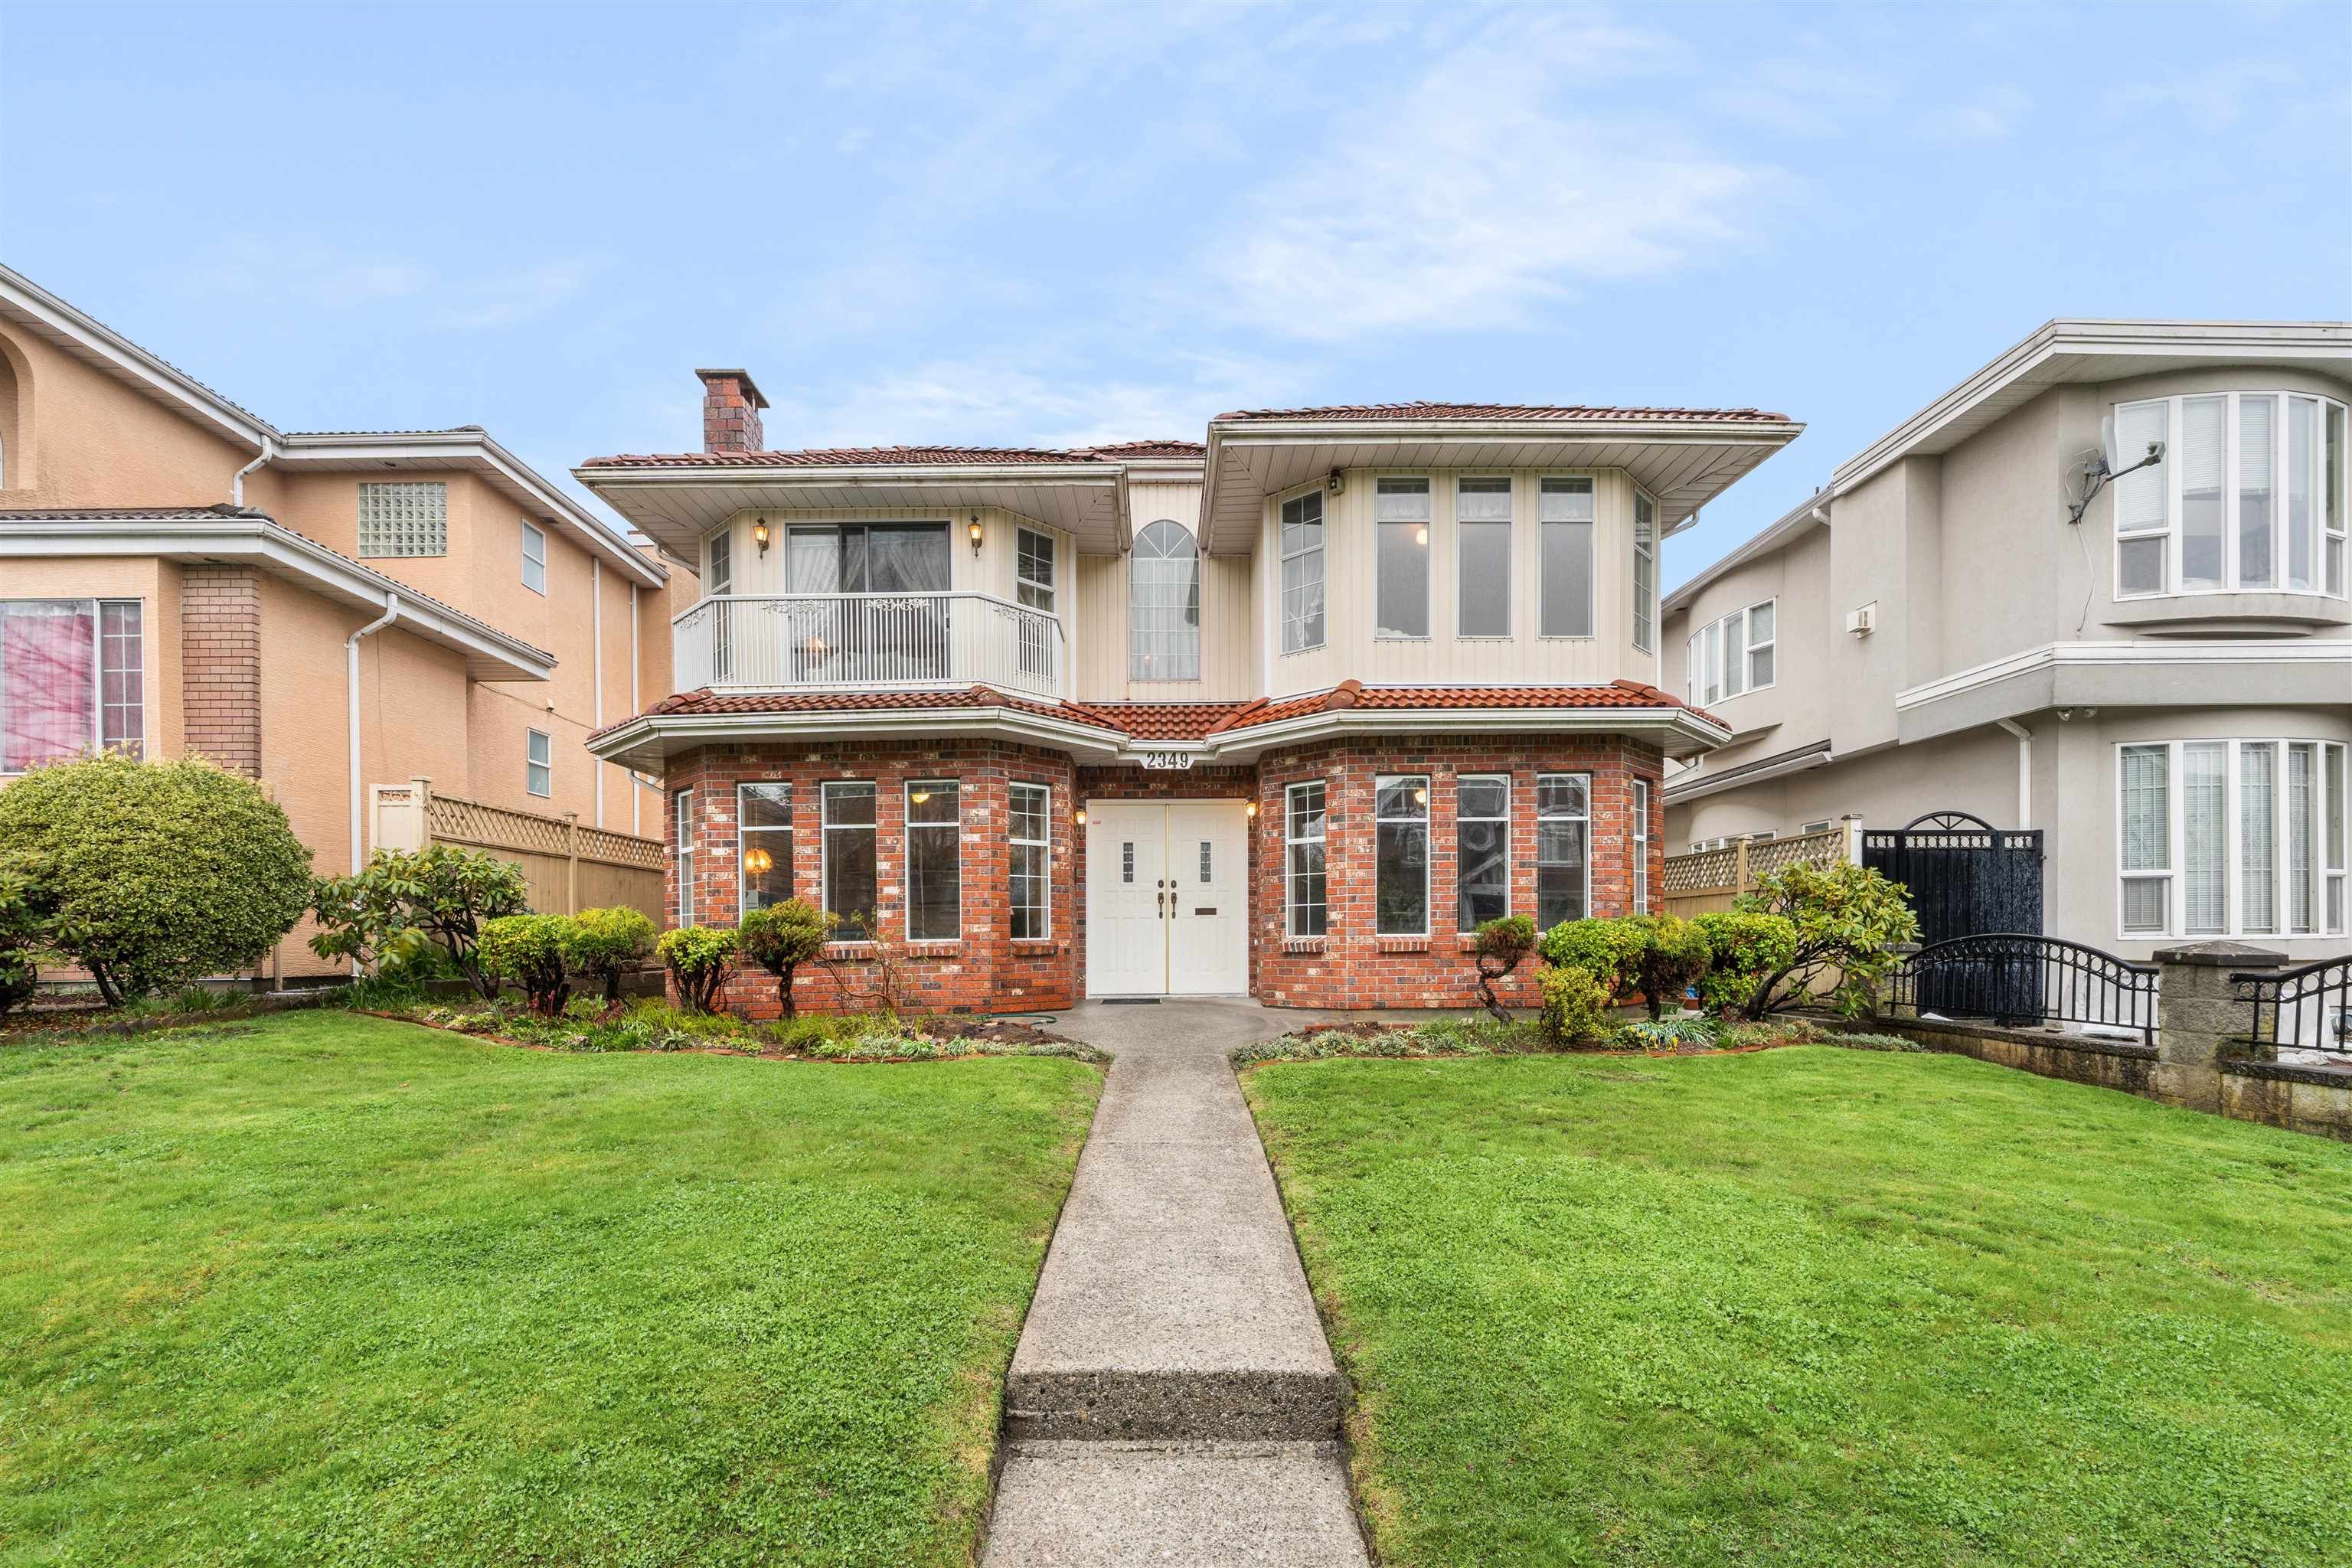 I have sold a property at 2349 BONNYVALE AVE in Vancouver
